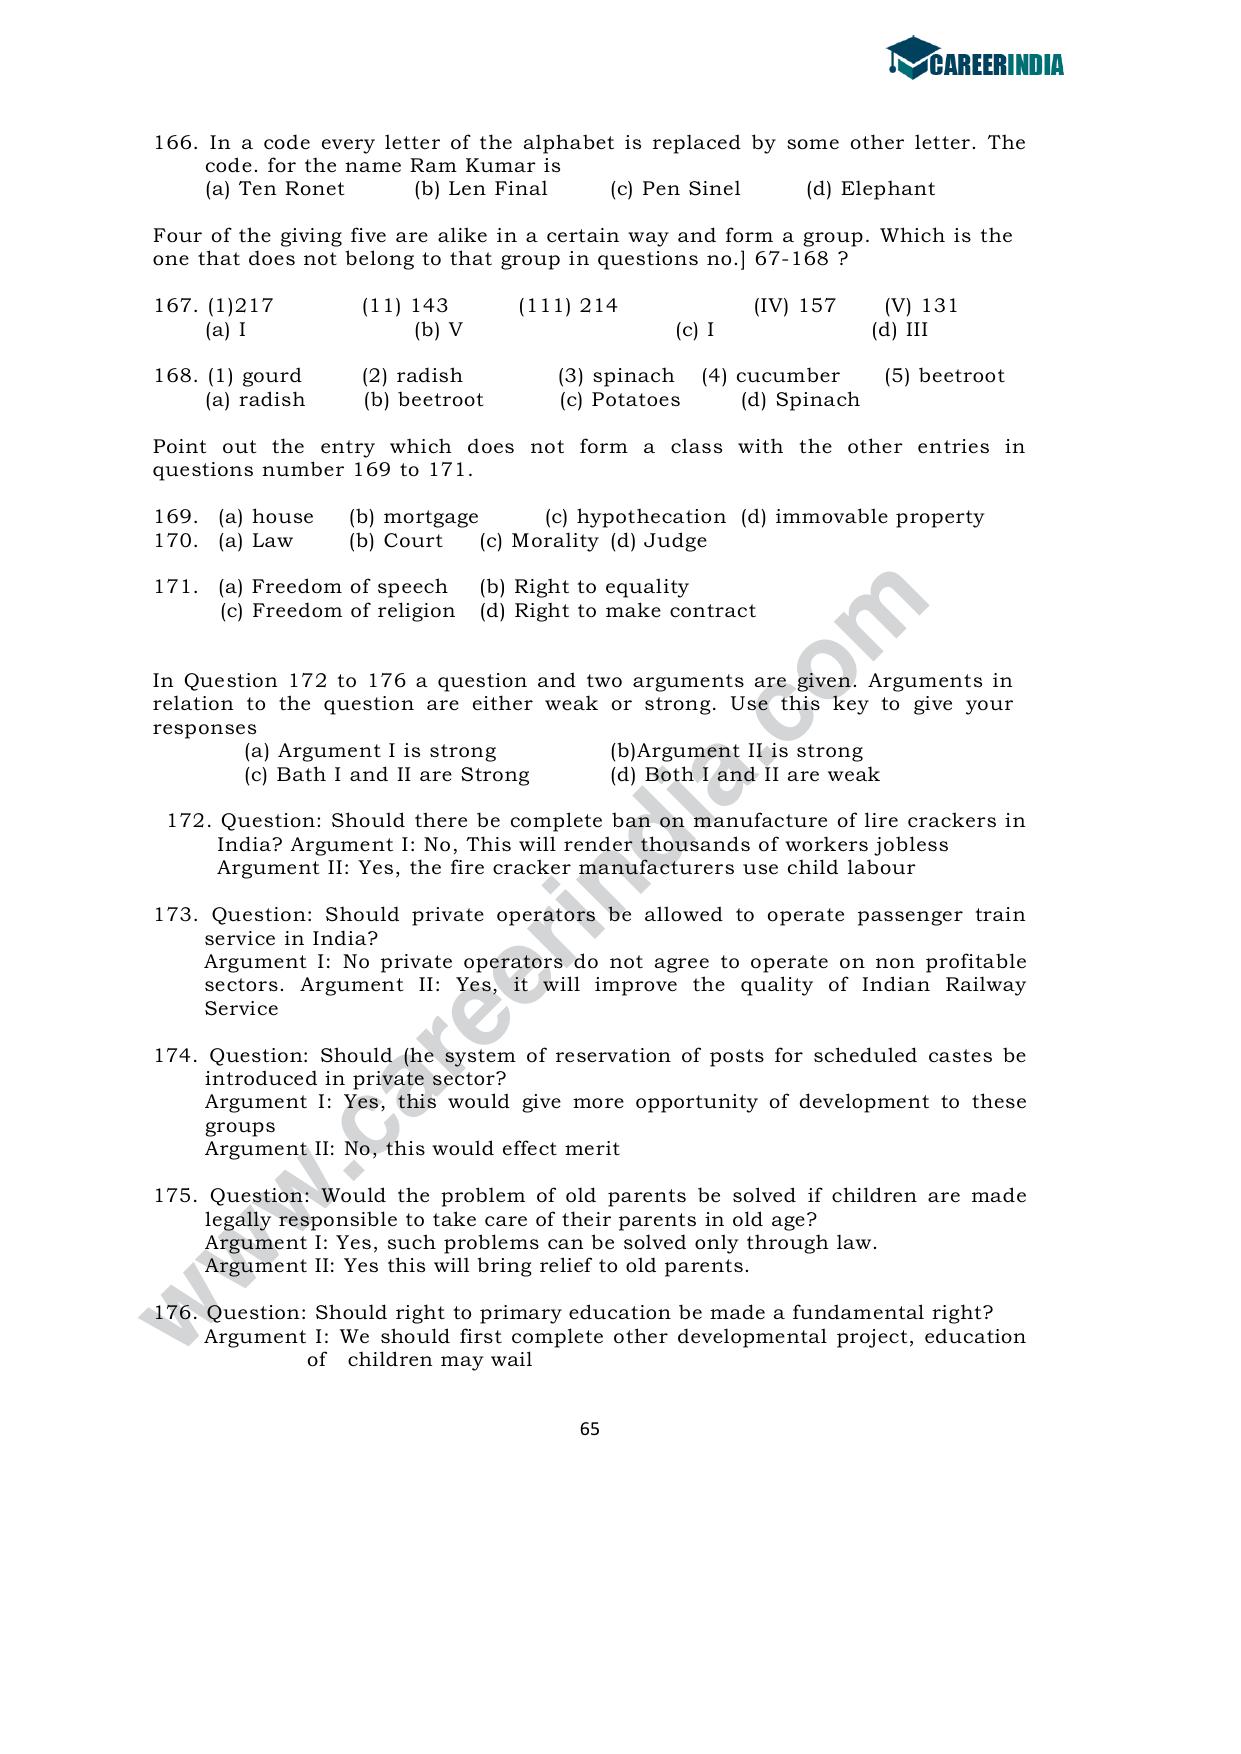 CLAT 2010 UG Sample Question Paper - Page 18